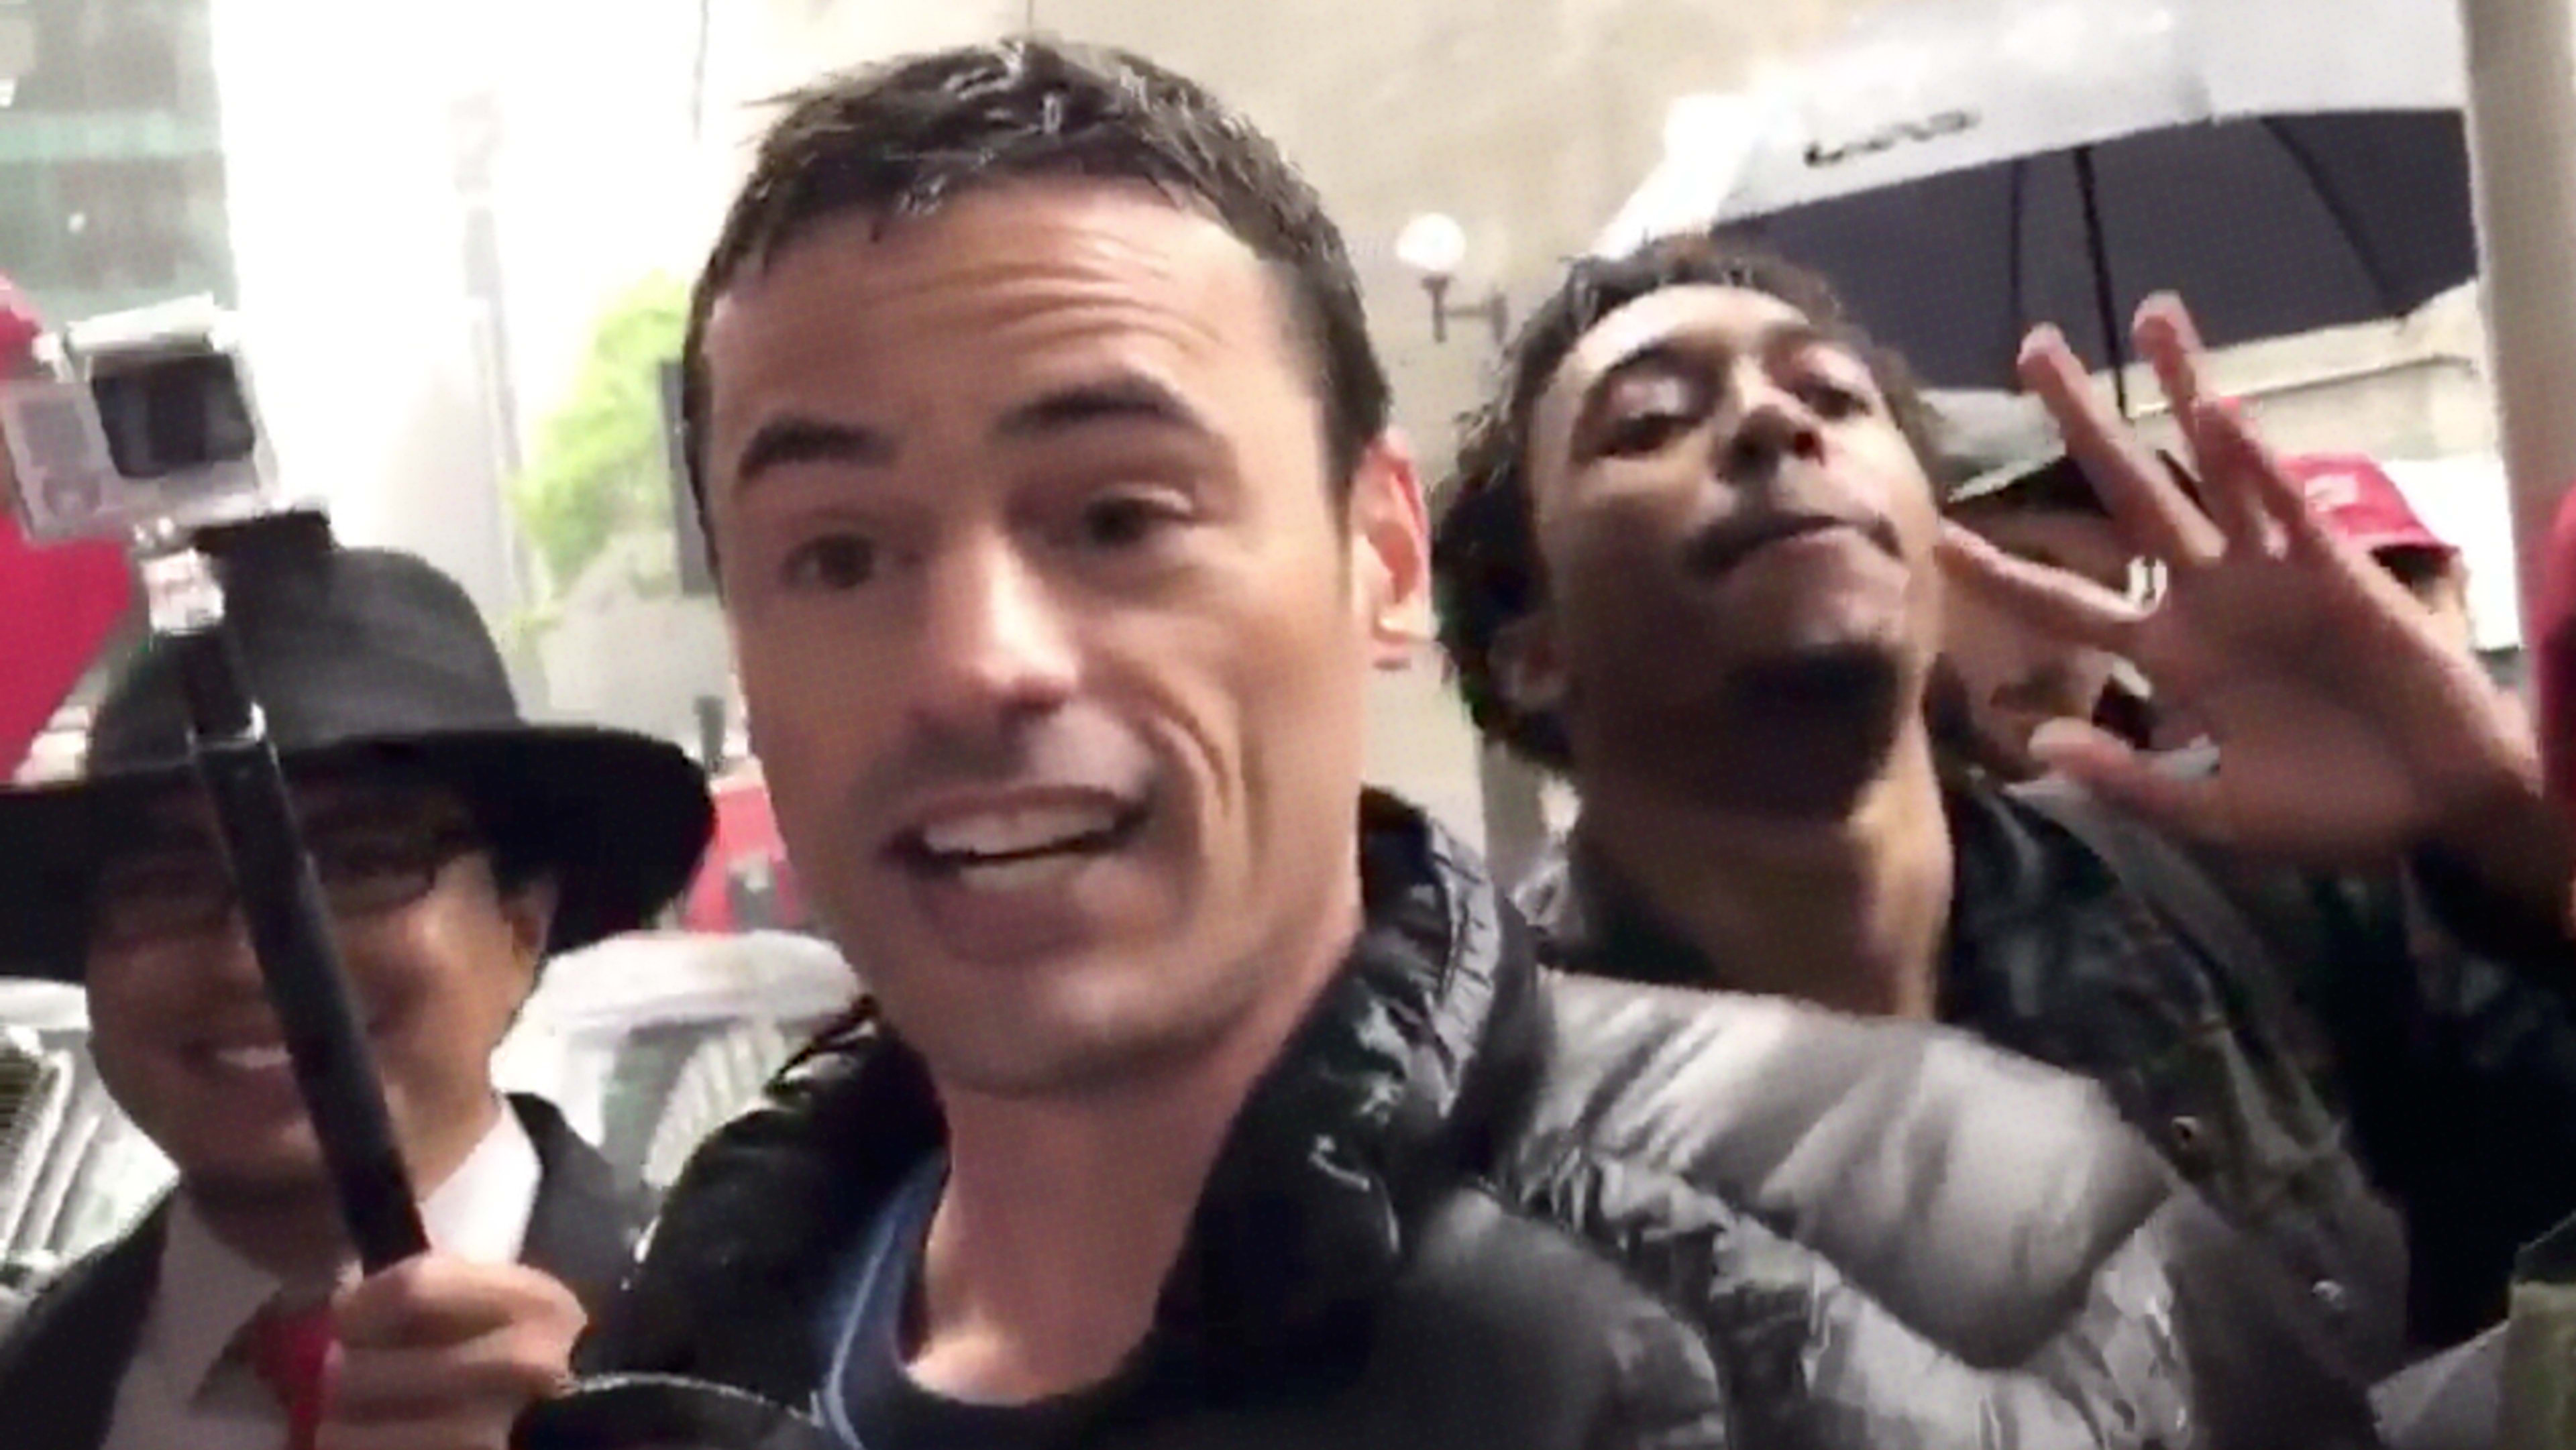 Read NYC lawyer Aaron Schlossberg’s apology for the racist rant heard around the world